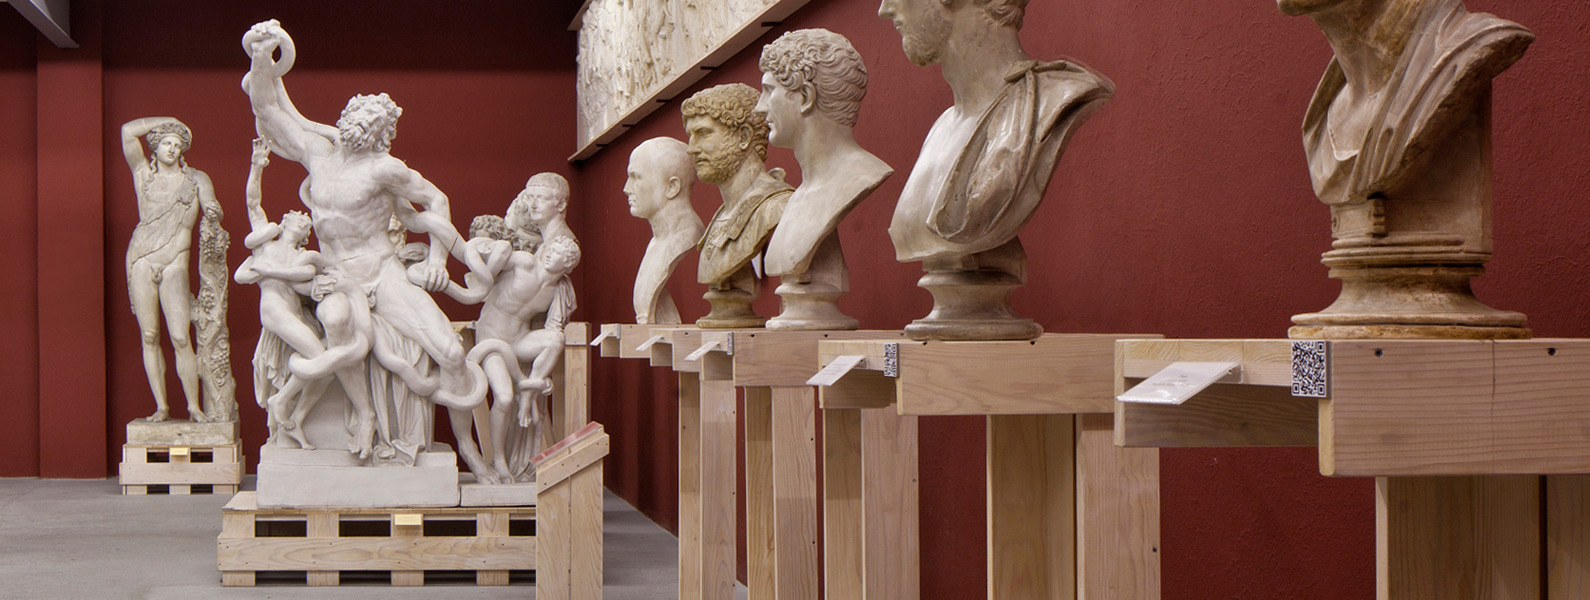 The Collection of Plaster Casts of Sculptures of Antiquity